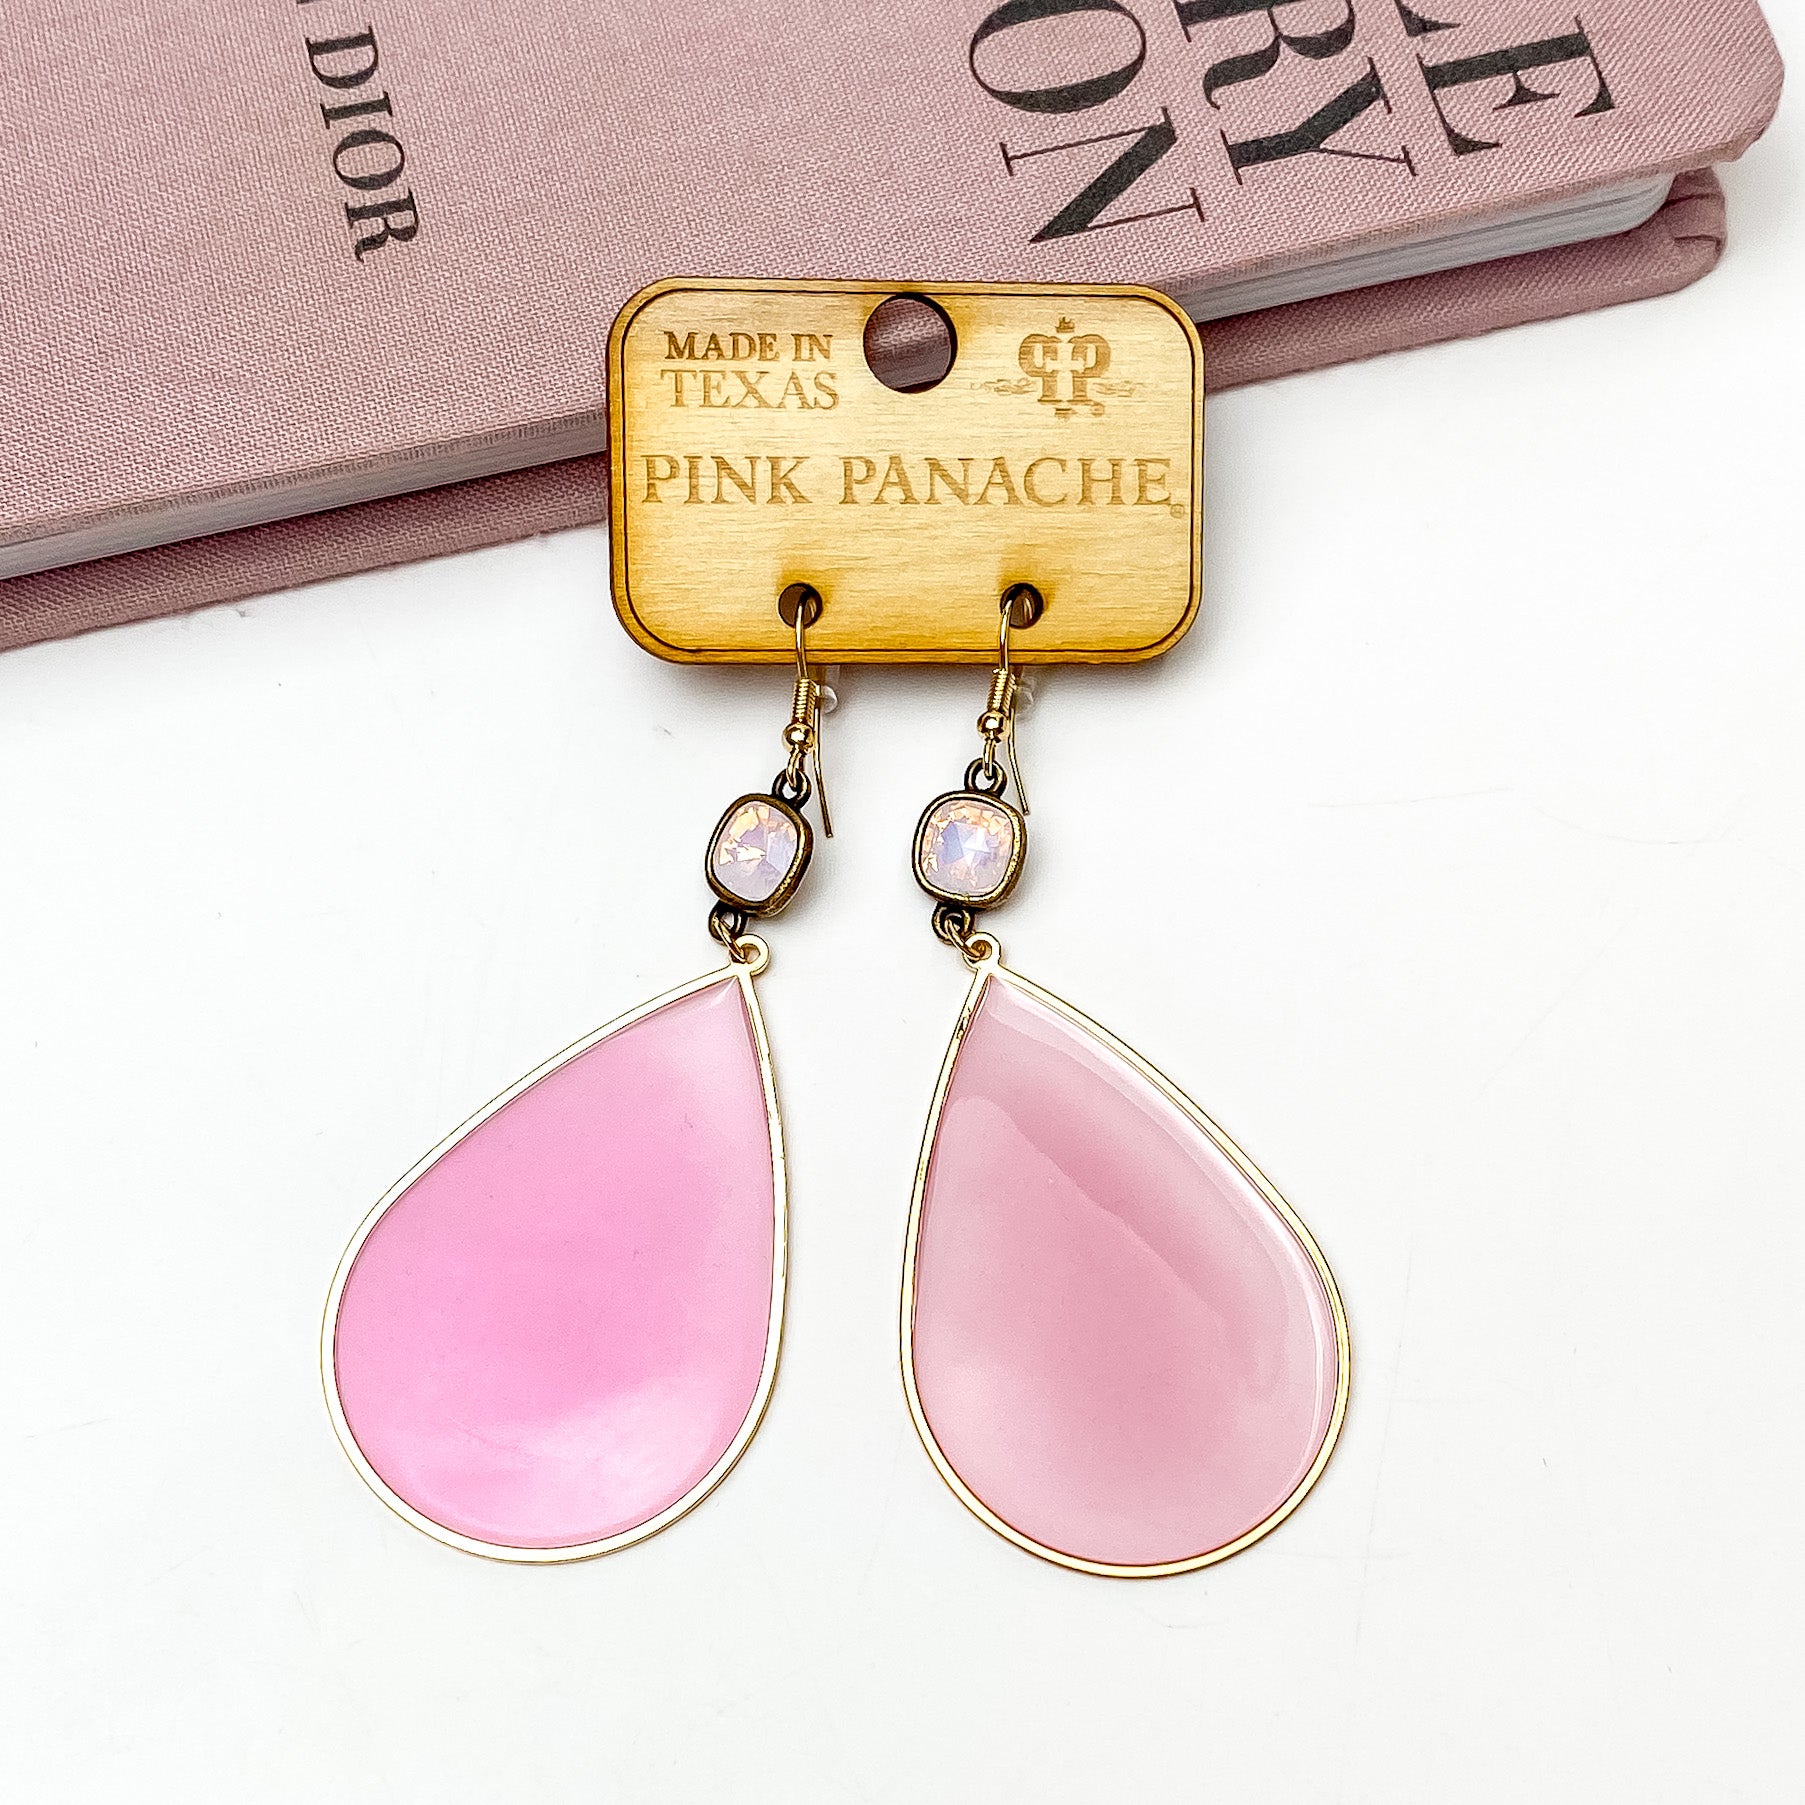 Rose water opal cushion cut crystal drop earrings a pink acrylic teardrop pendant outlined in gold. These earrings are pictured on a wooden earring holder on a white background in front of a mauve colored book. 